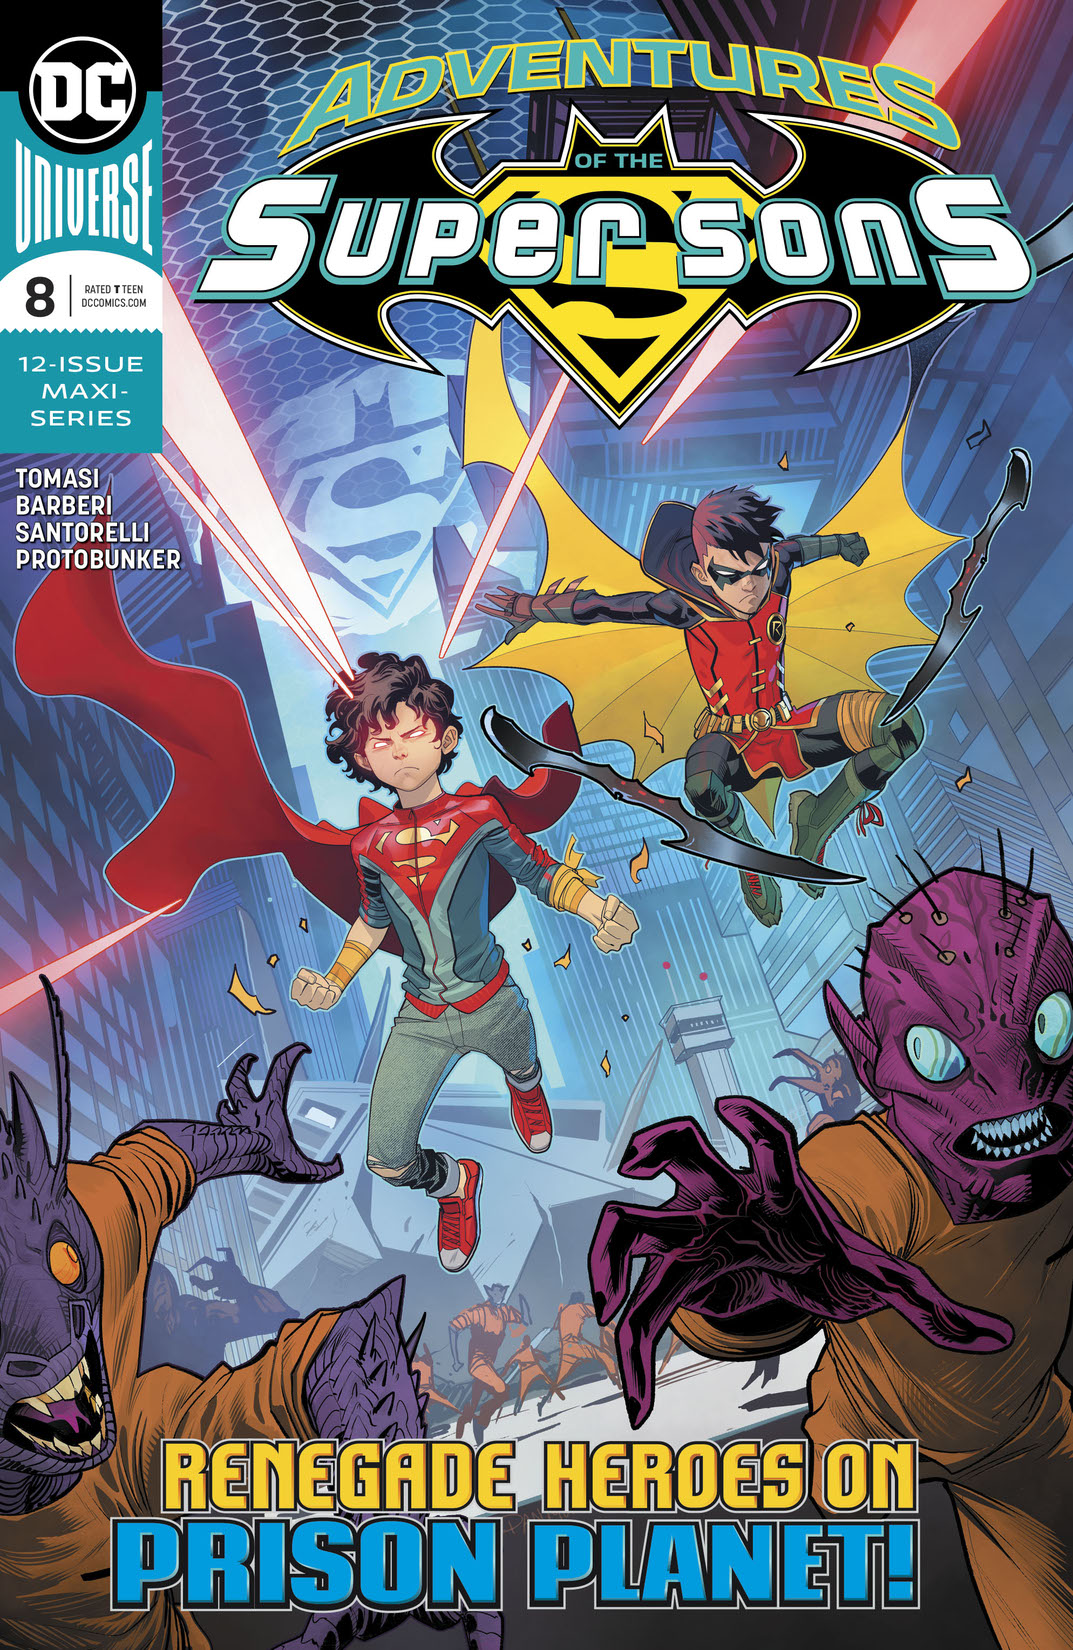 Adventures of the Super Sons #8 preview images